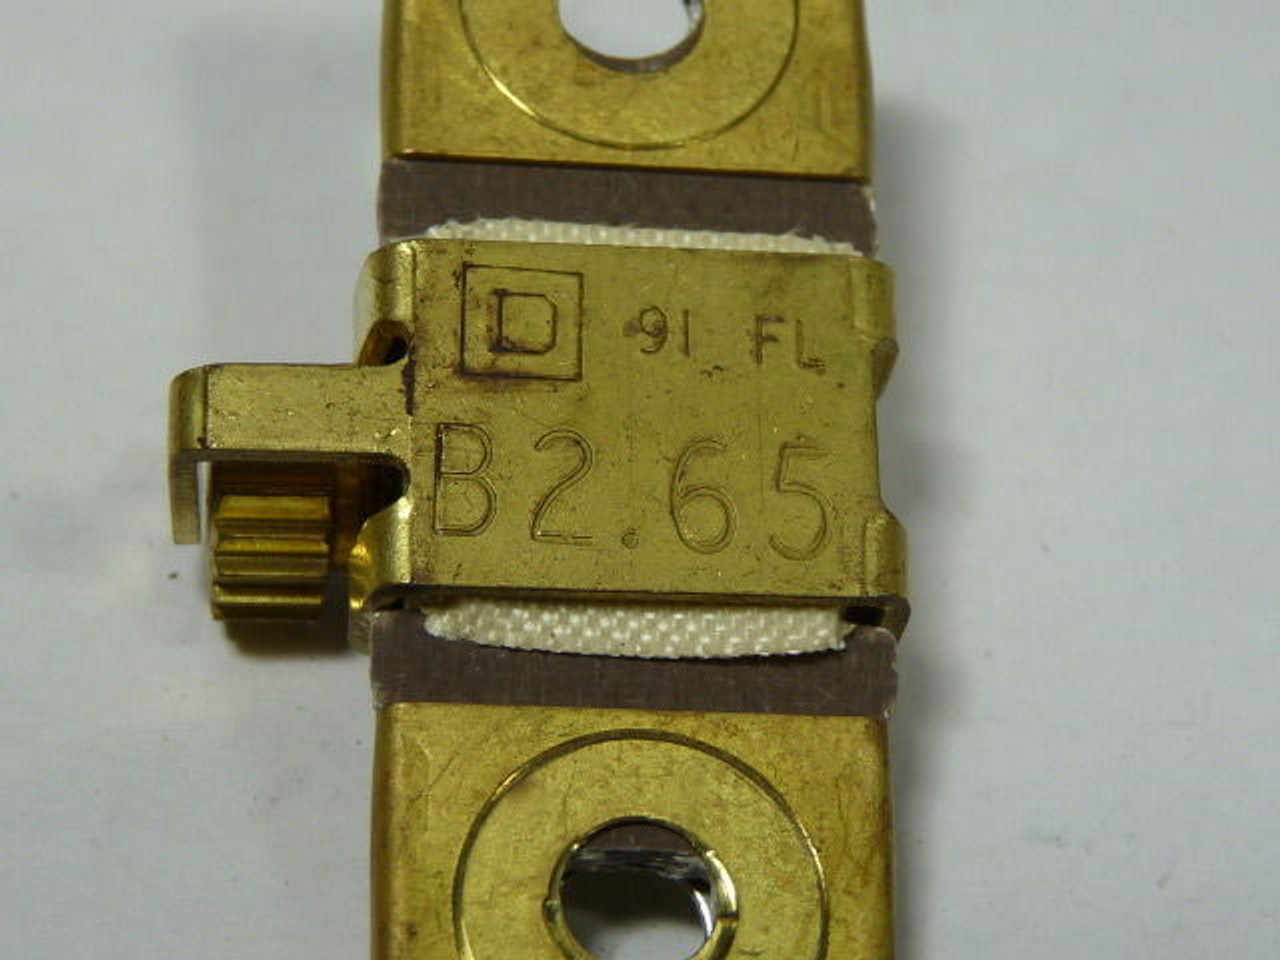 Square D B2.65 Overload Relay Thermal Unit USED